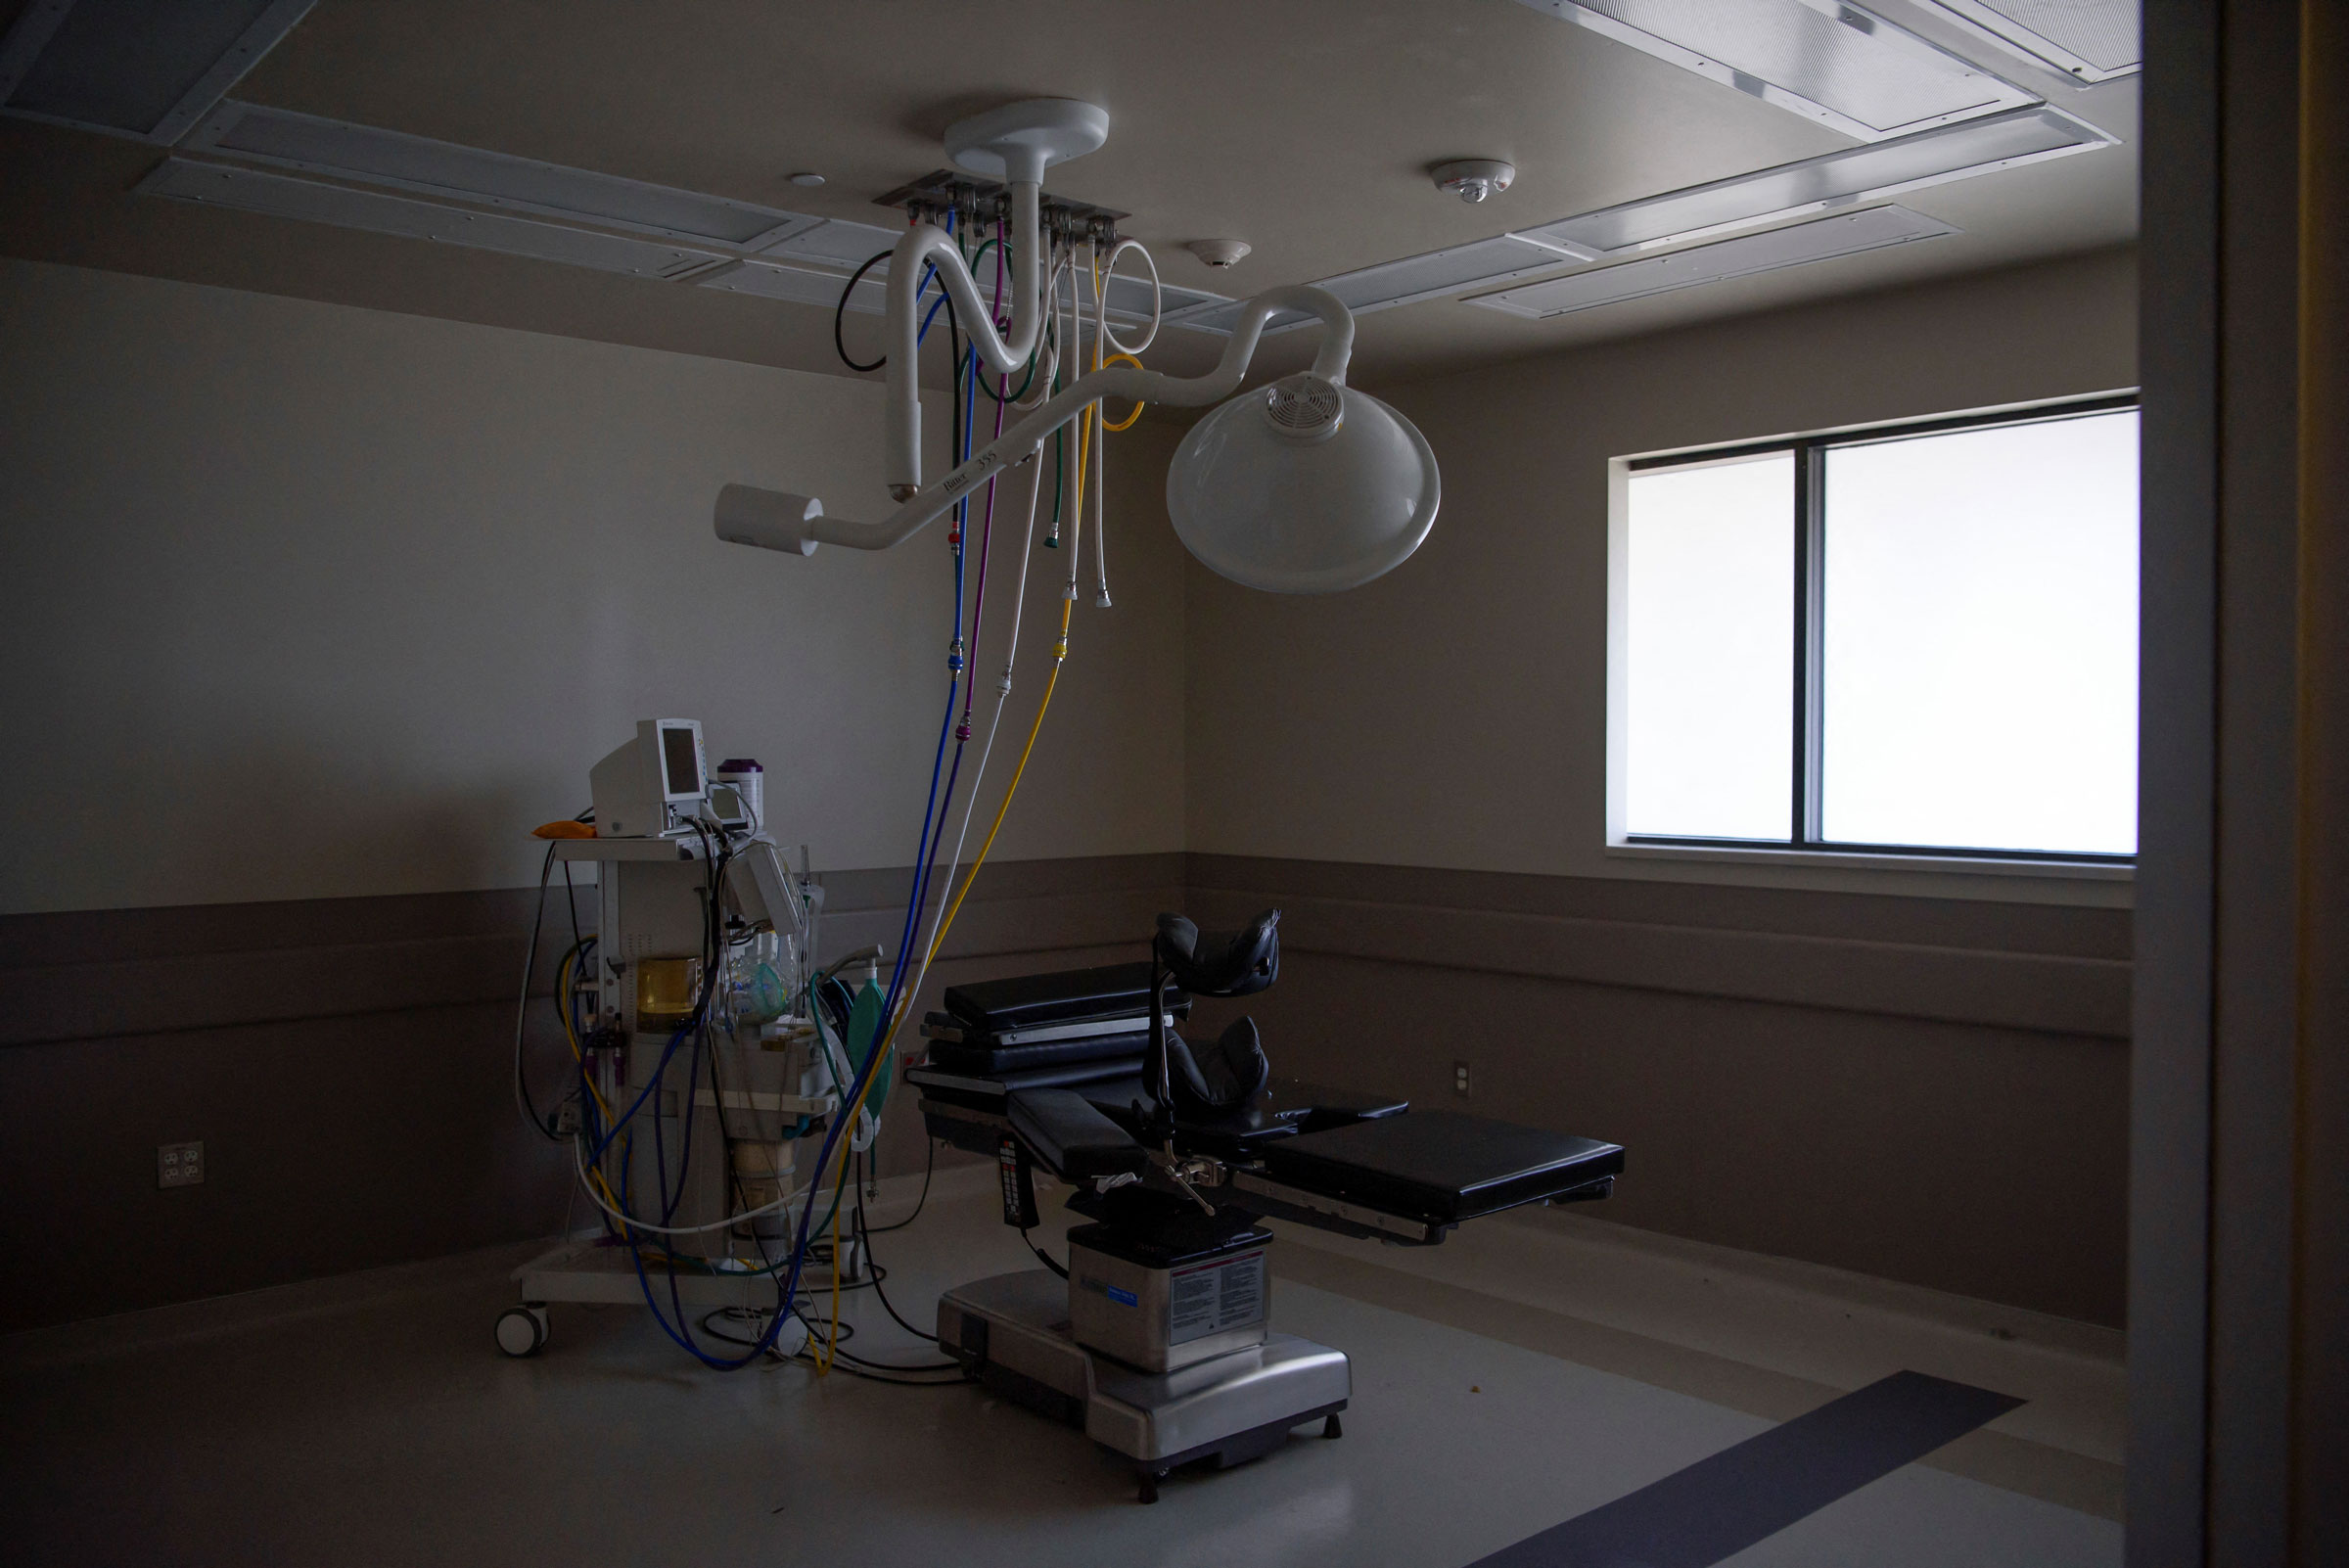 An operating room sits empty at Alamo Women's Reproductive Services, an abortion clinic that closed its doors following the overturn of Roe v. Wade and plans to reopen in New Mexico and Illinois, in San Antonio, Texas, on Aug. 16, 2022. (Callaghan O’Hare—Reuters)